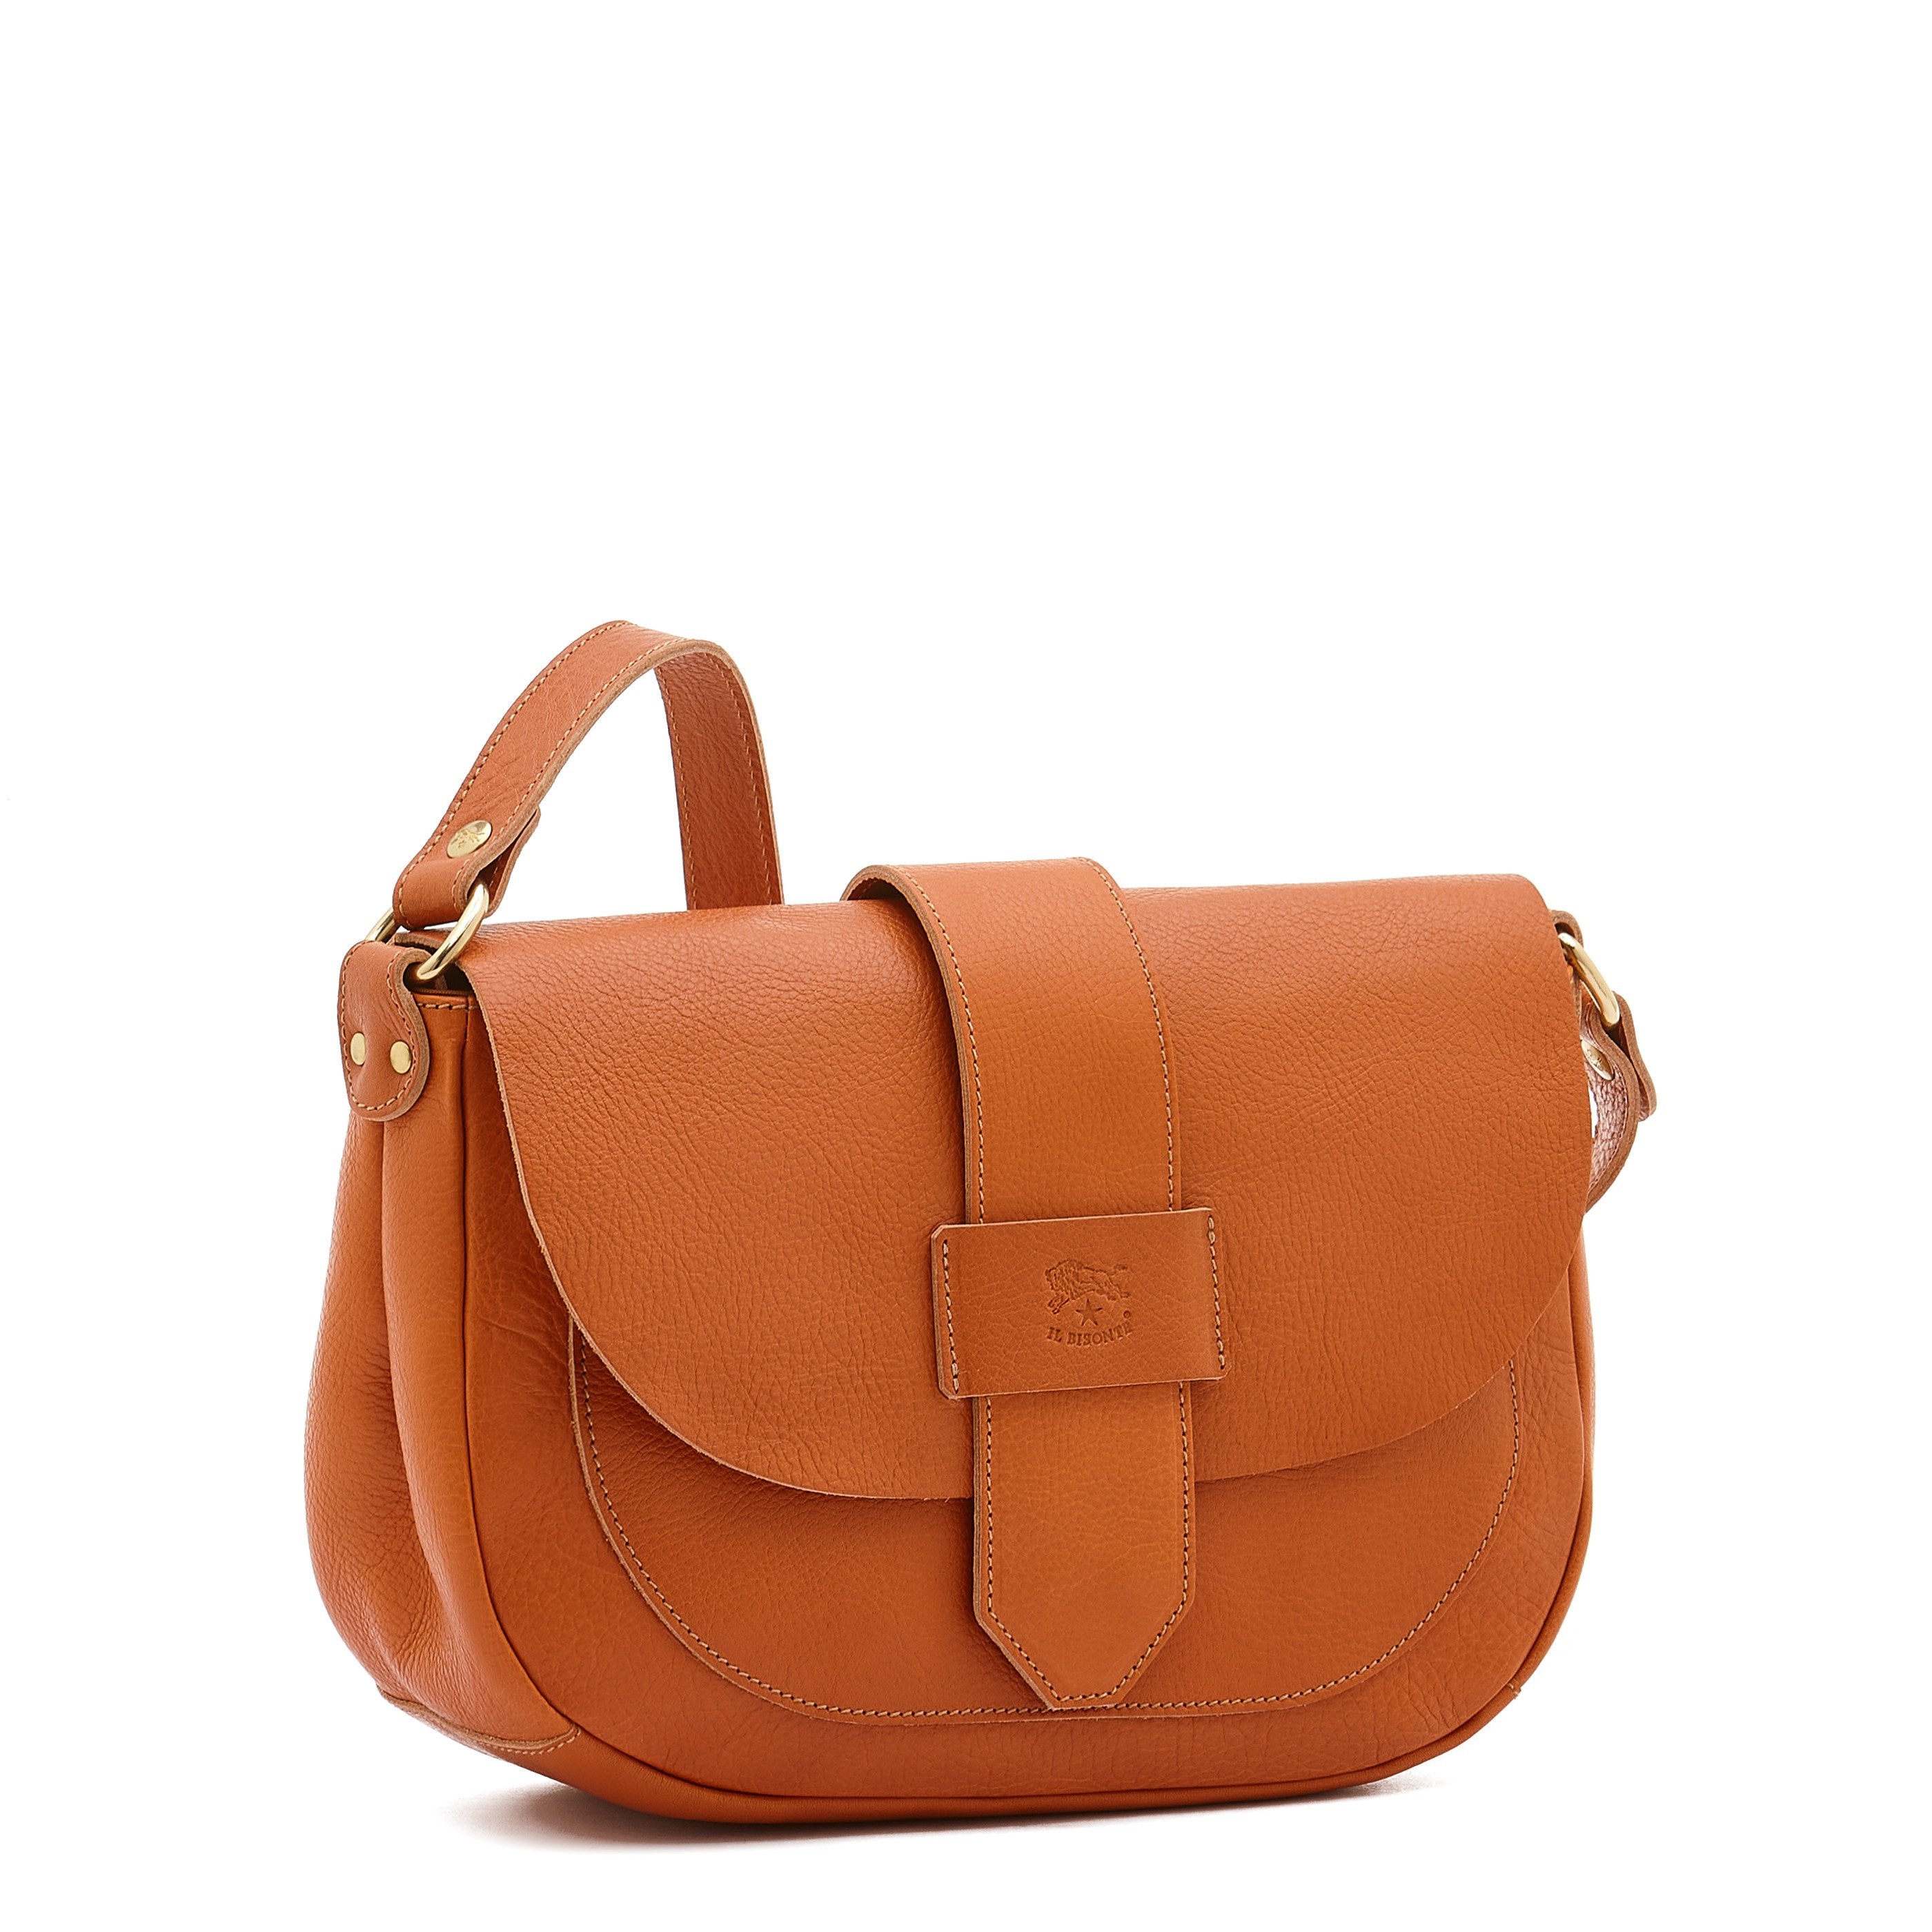 Fausta Medium  Women's crossbody bag in leather color natural – Il Bisonte